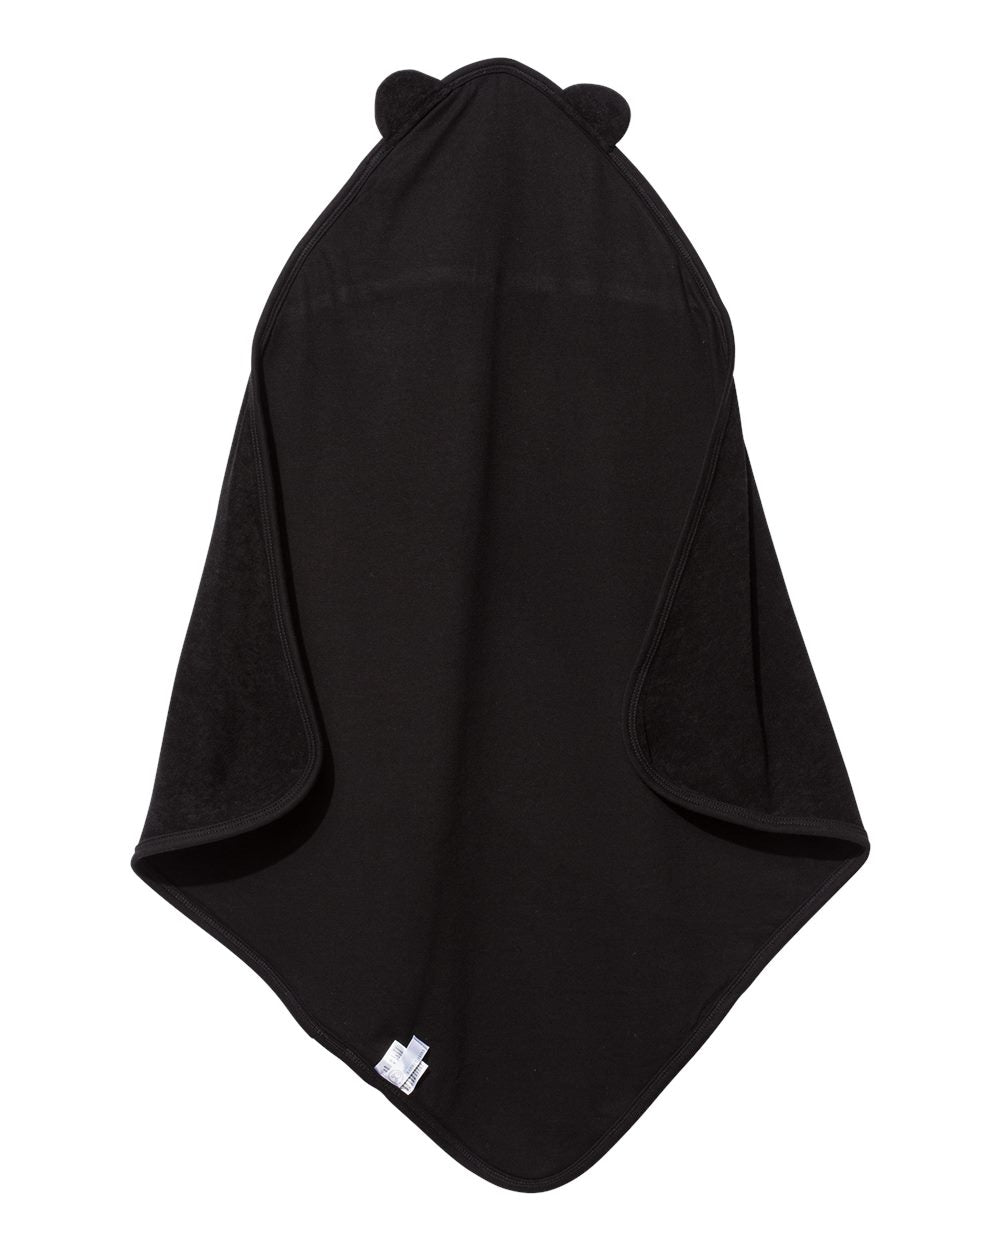 Baby / Toddler --- Hooded Towel with Ears, Black